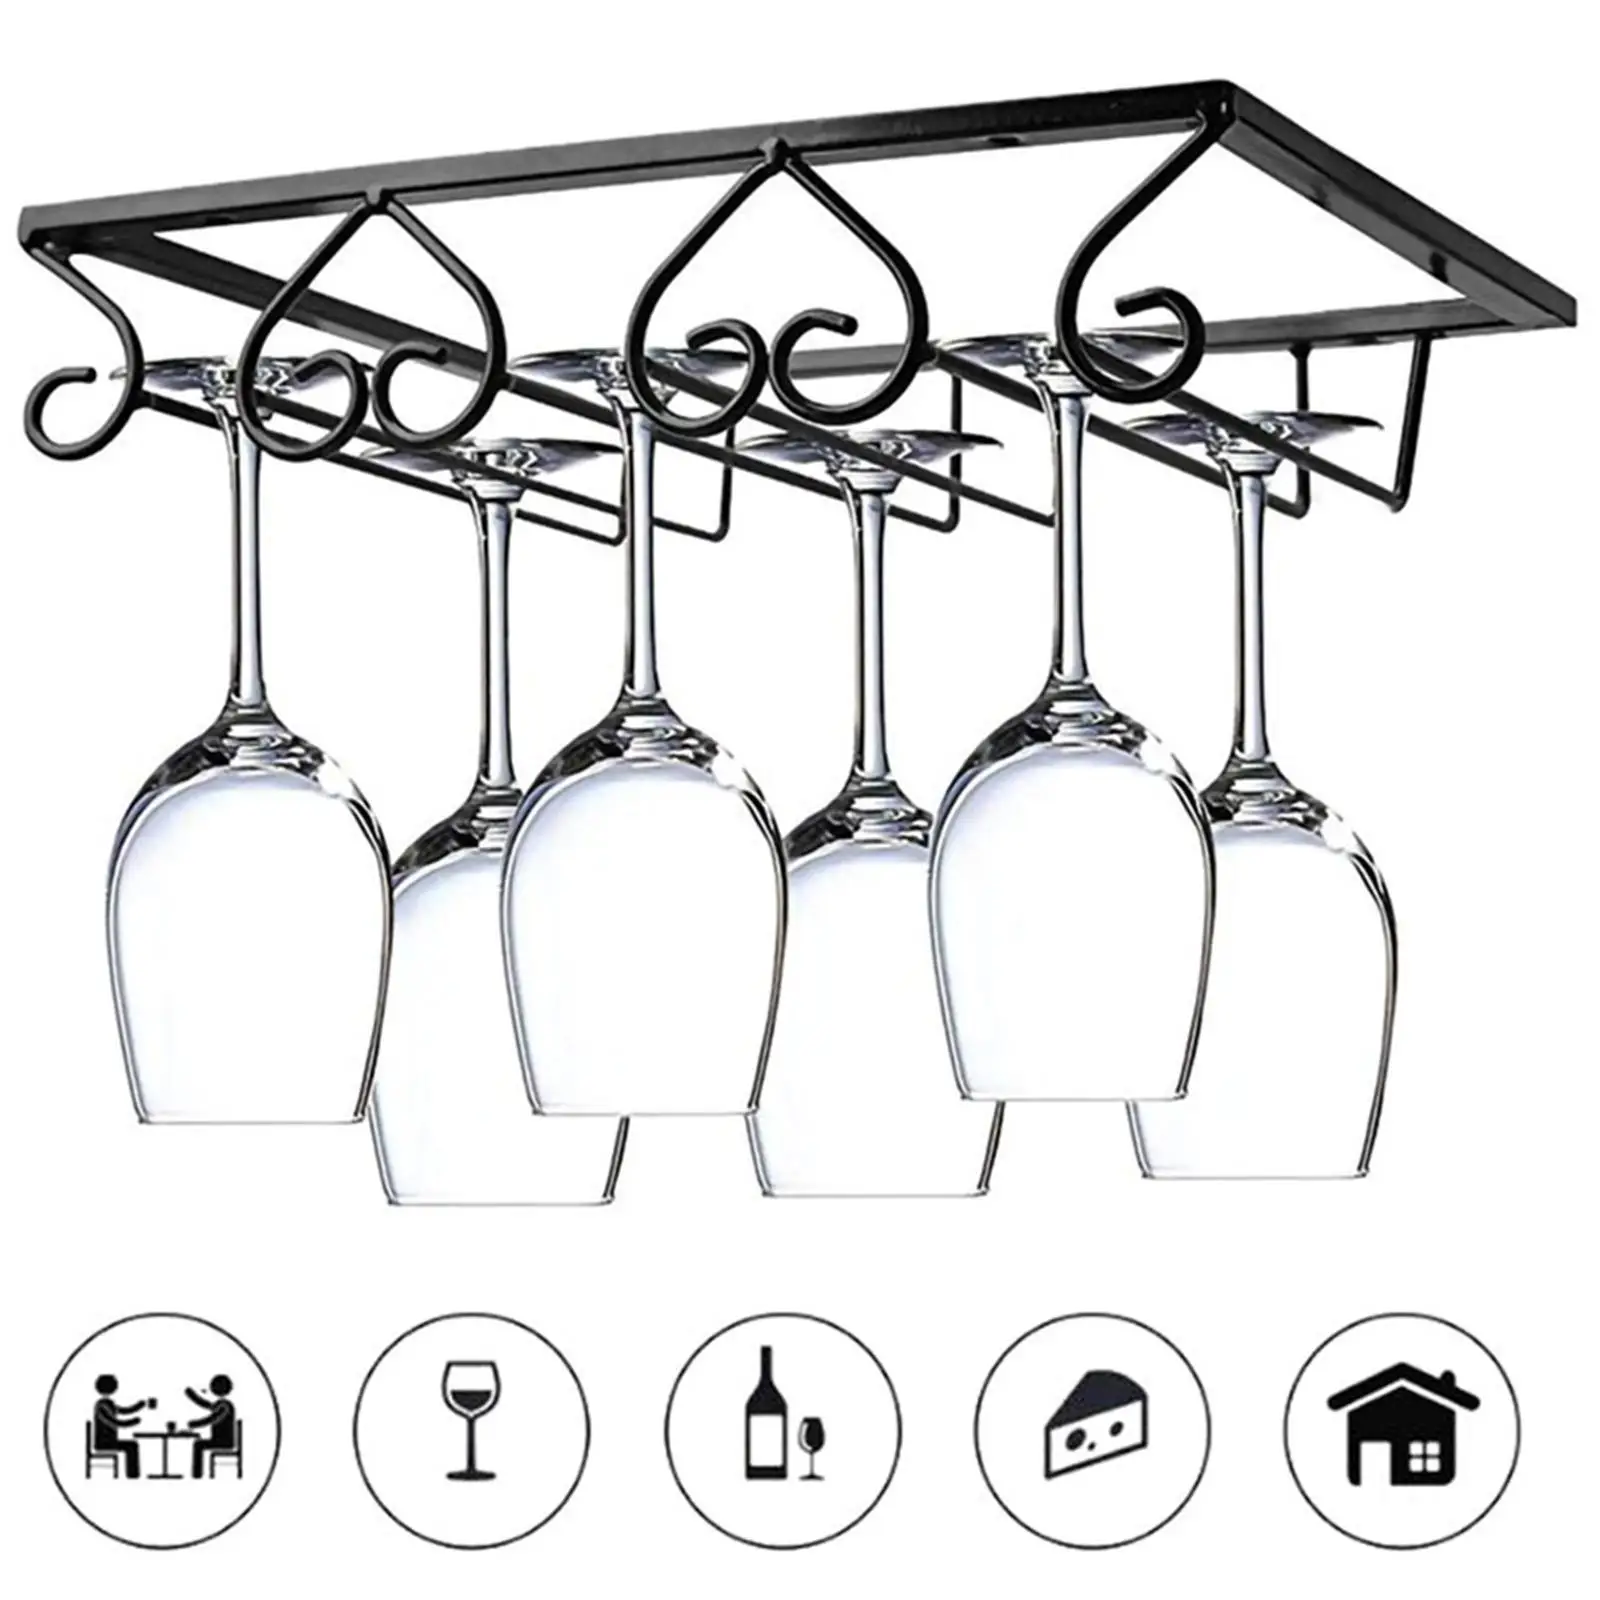 Wine Glass Holder Storage Rack Metal Air Drying System for Bar Kitchen Countertop Goblet